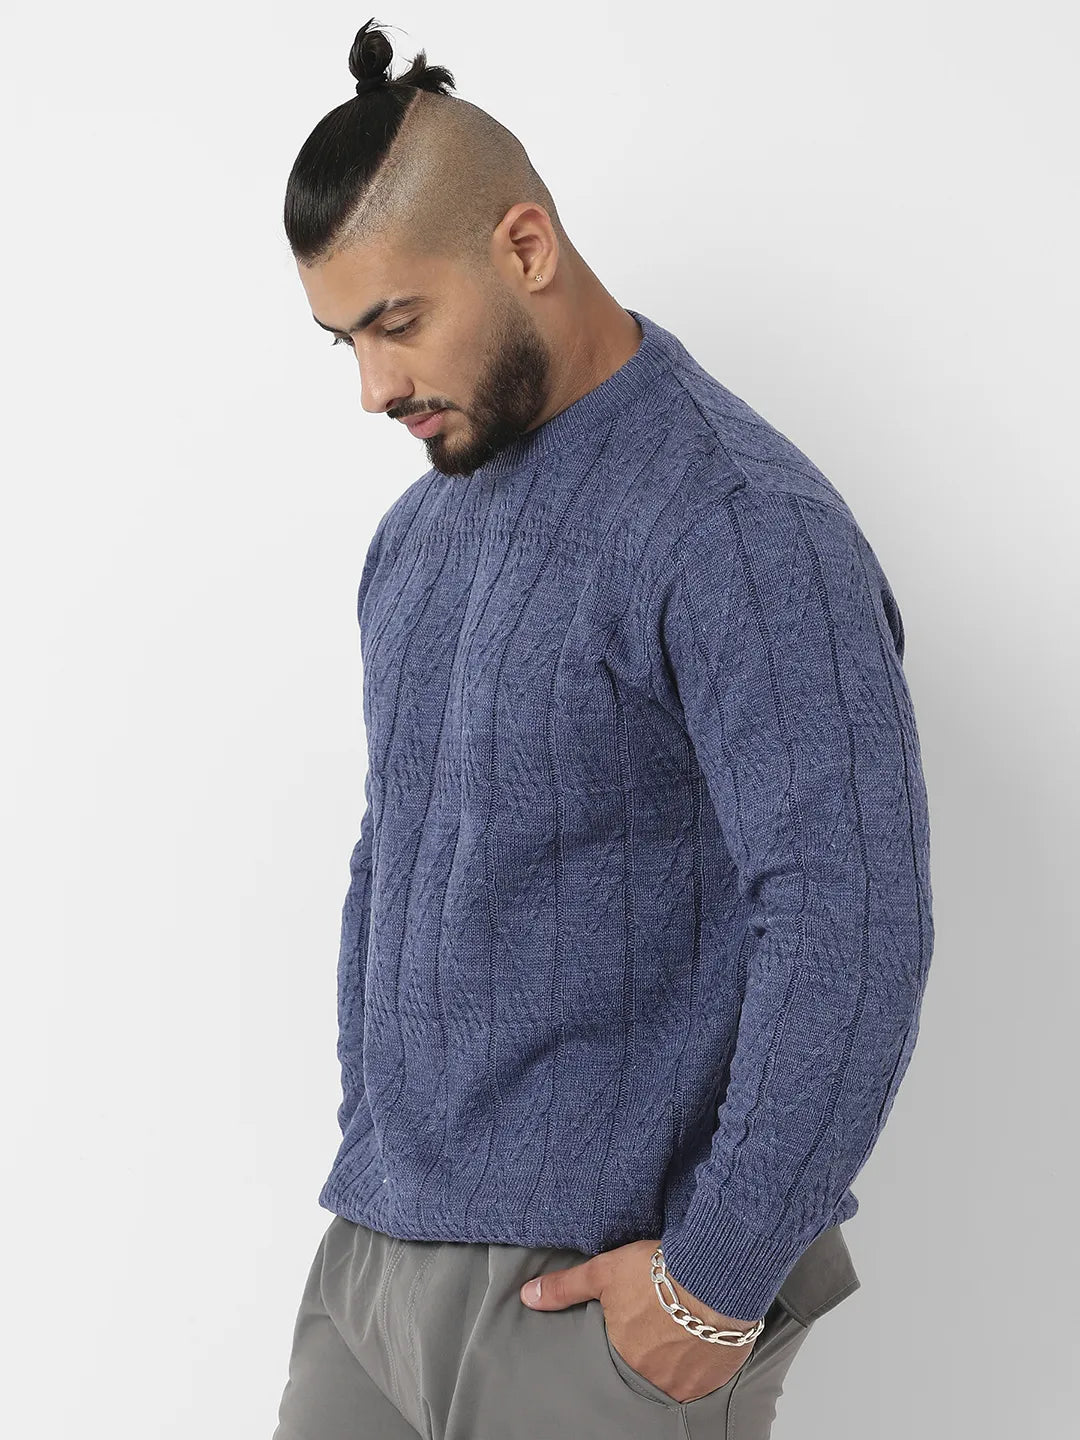 Blue Textured Knit Pullover Sweater